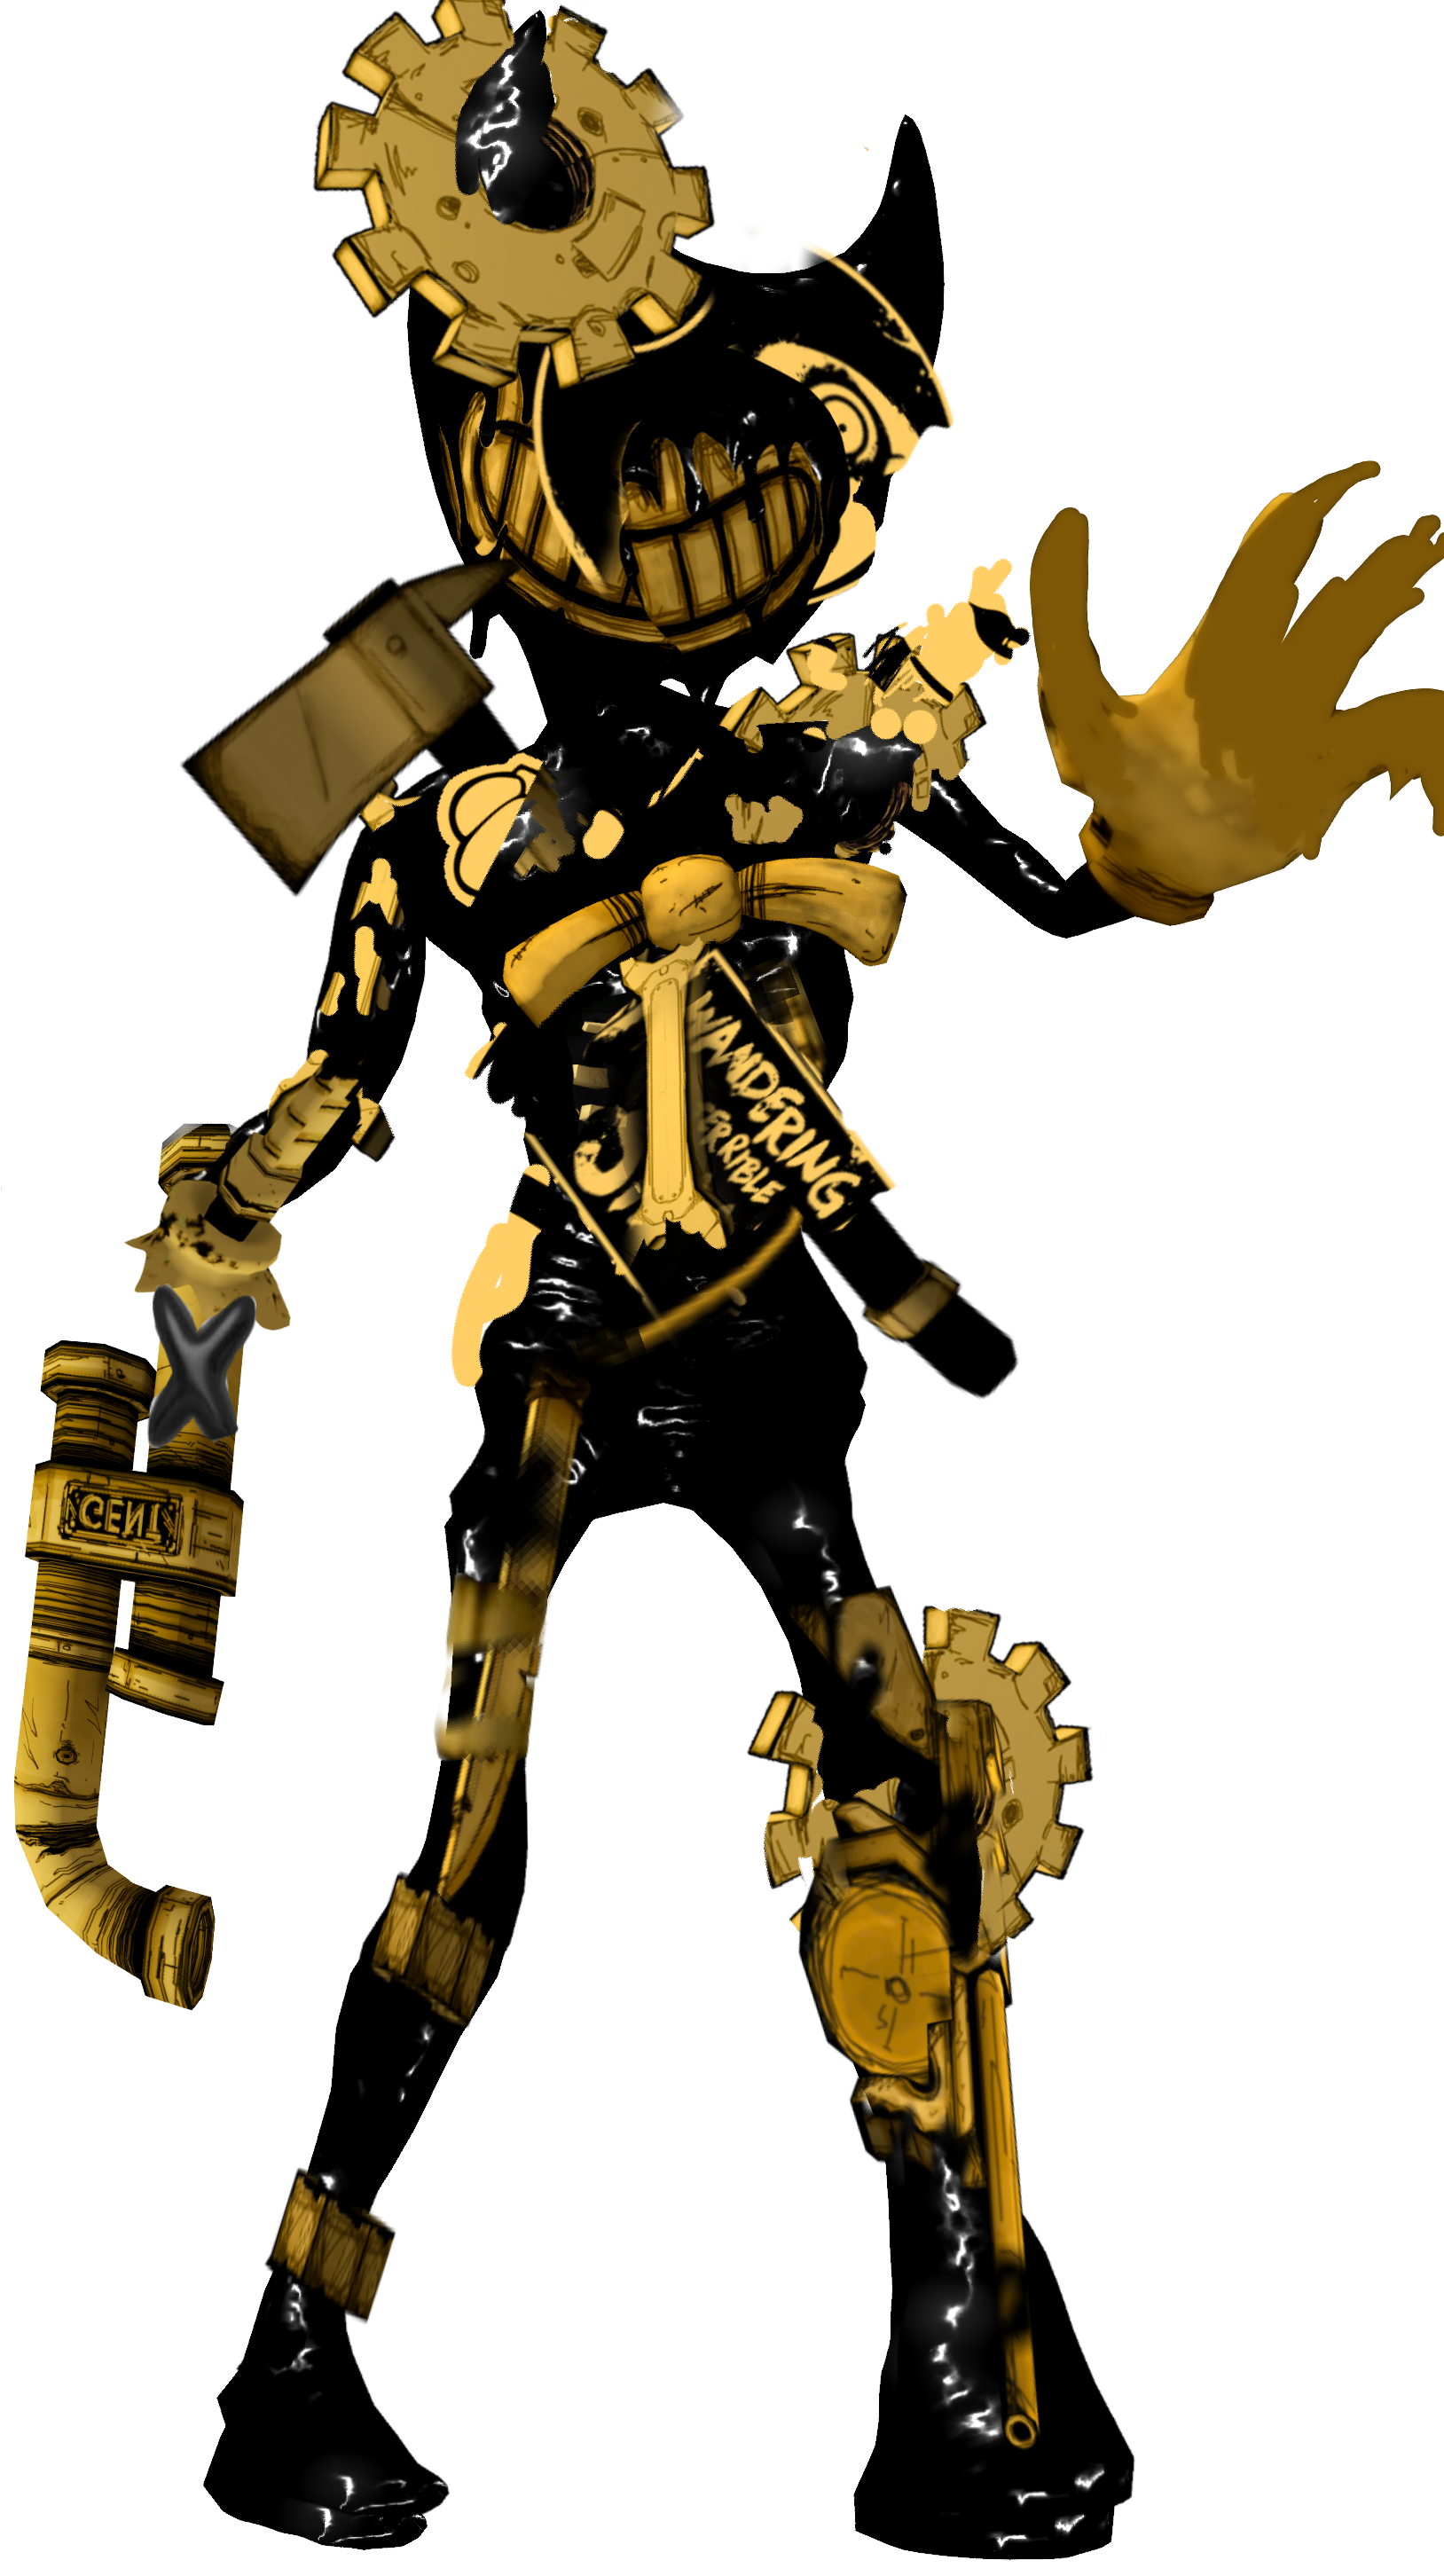 freetoedit corrupted bendy - Image by - 1628 x 2904 png 1888kB